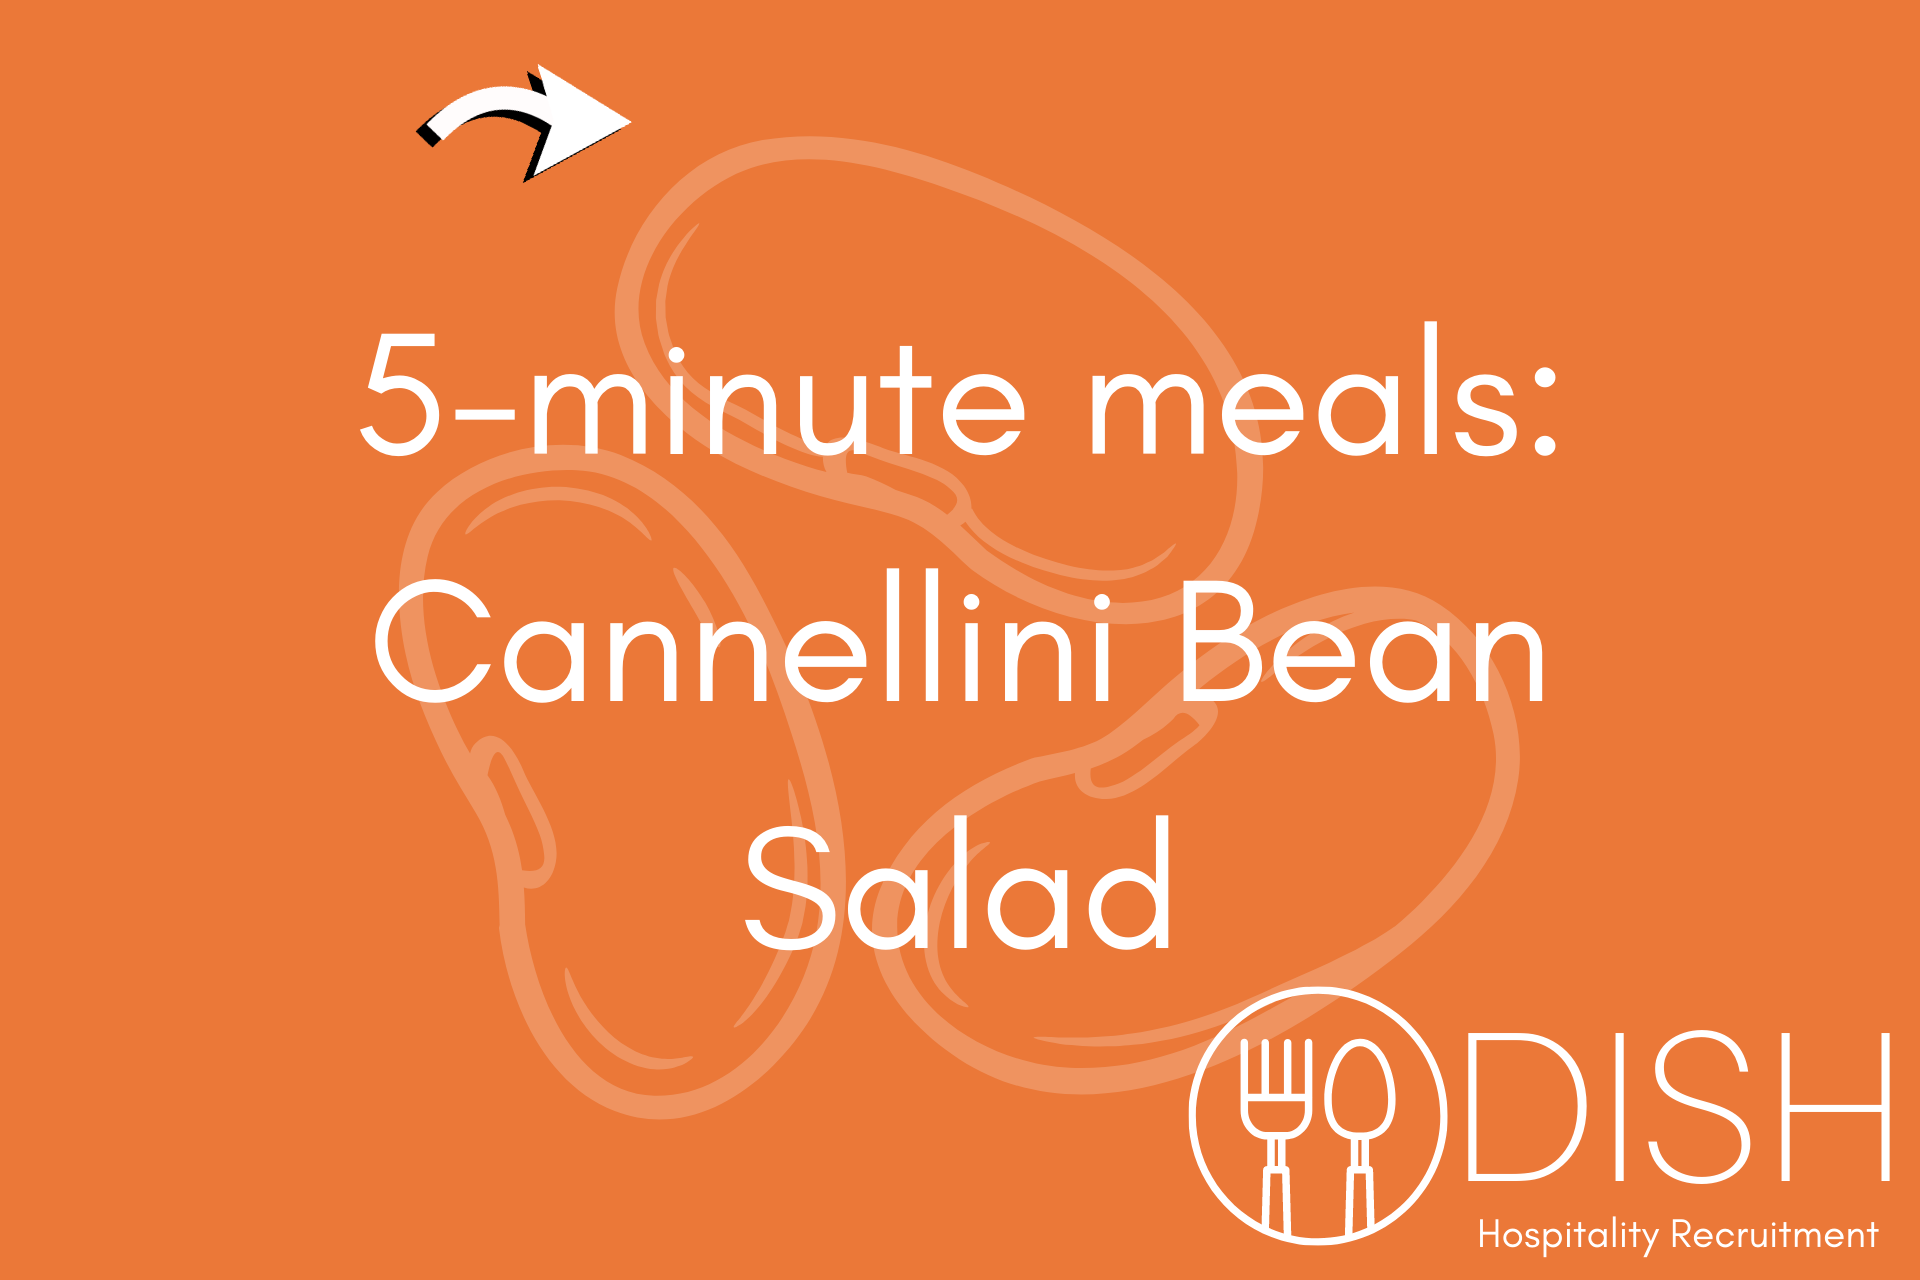 5 Minute Meal of the Week: Cannellini Bean Salad